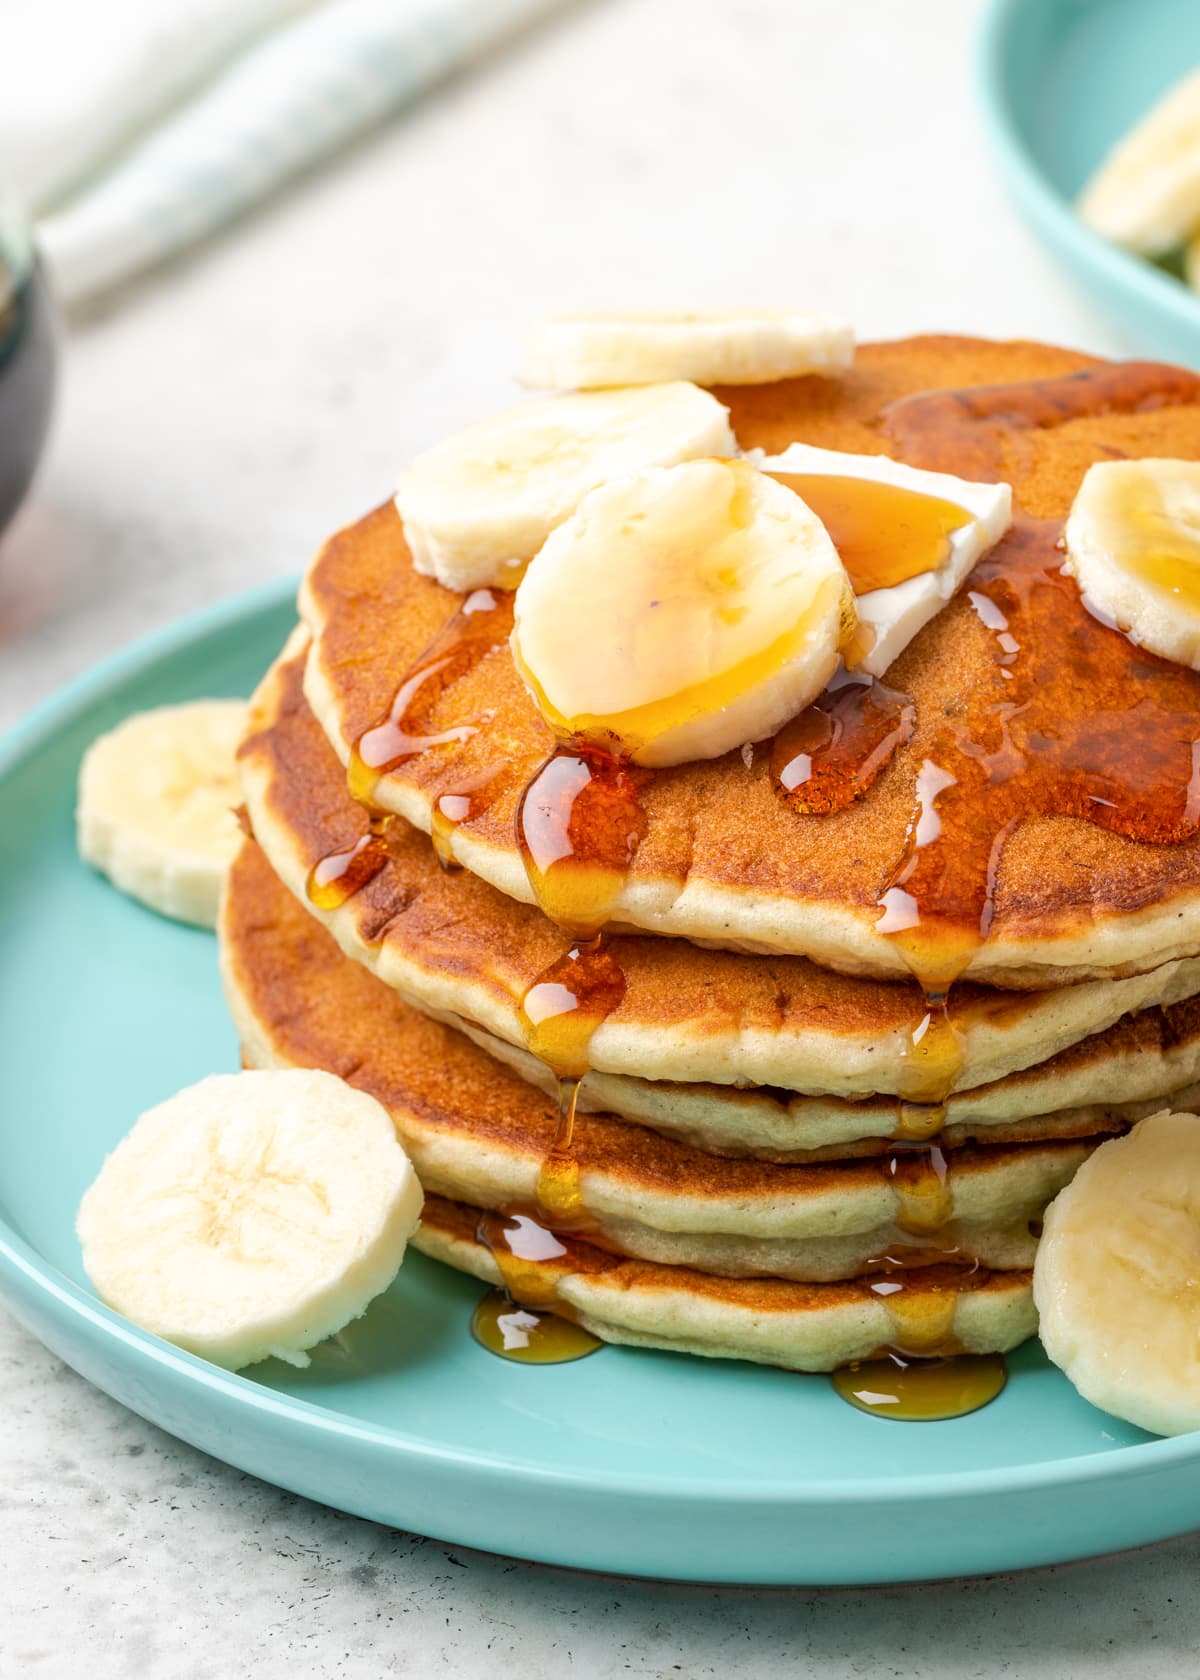 How to make banana pancakes - stacked and topped with sliced bananas and syrup.